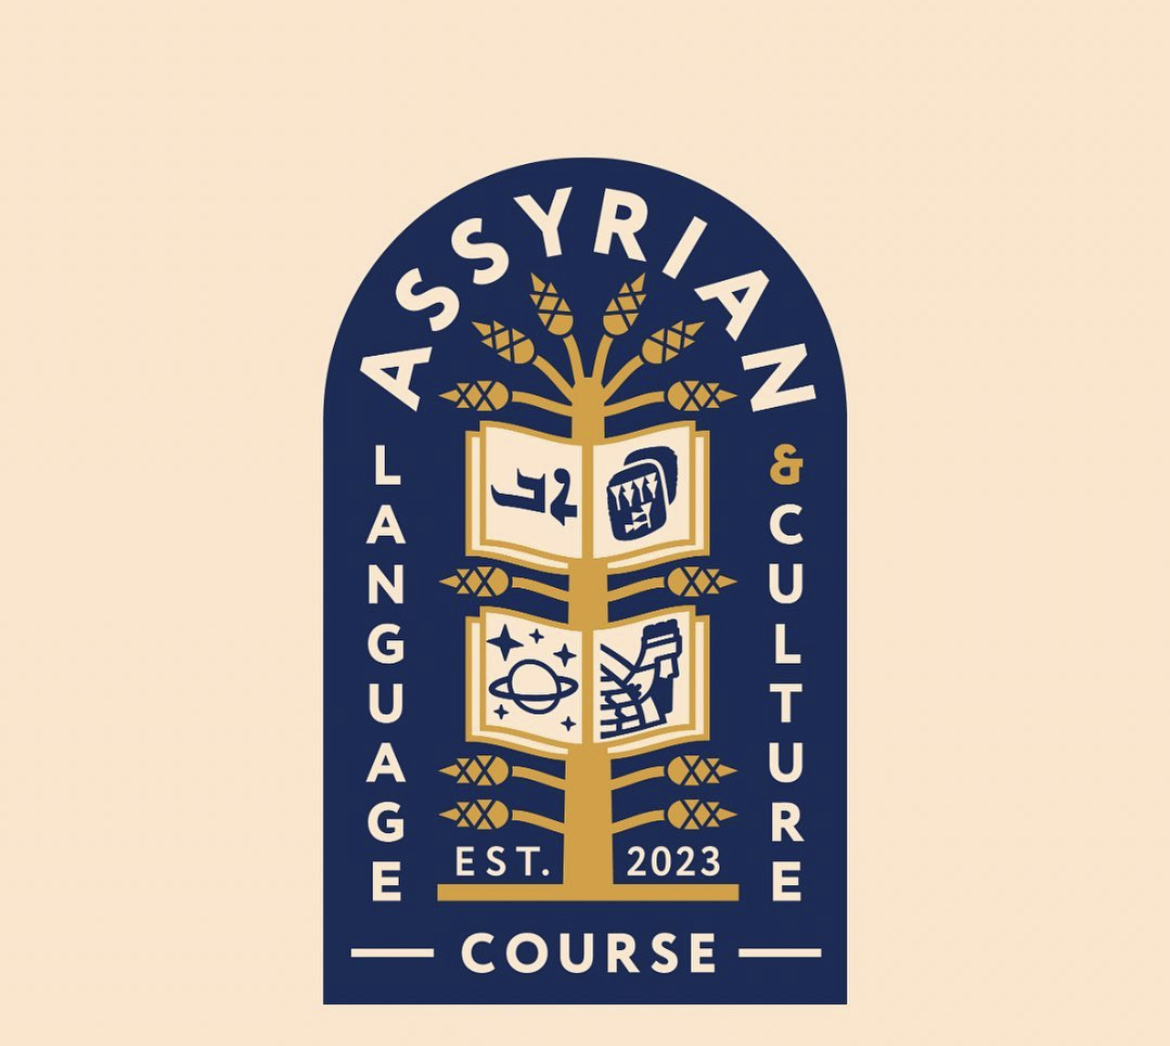 An+official+logo+representing+Niles+Wests+new+Assyrian+Language+and+Culture+course+via+%40d219assyrian+on+Instagram.